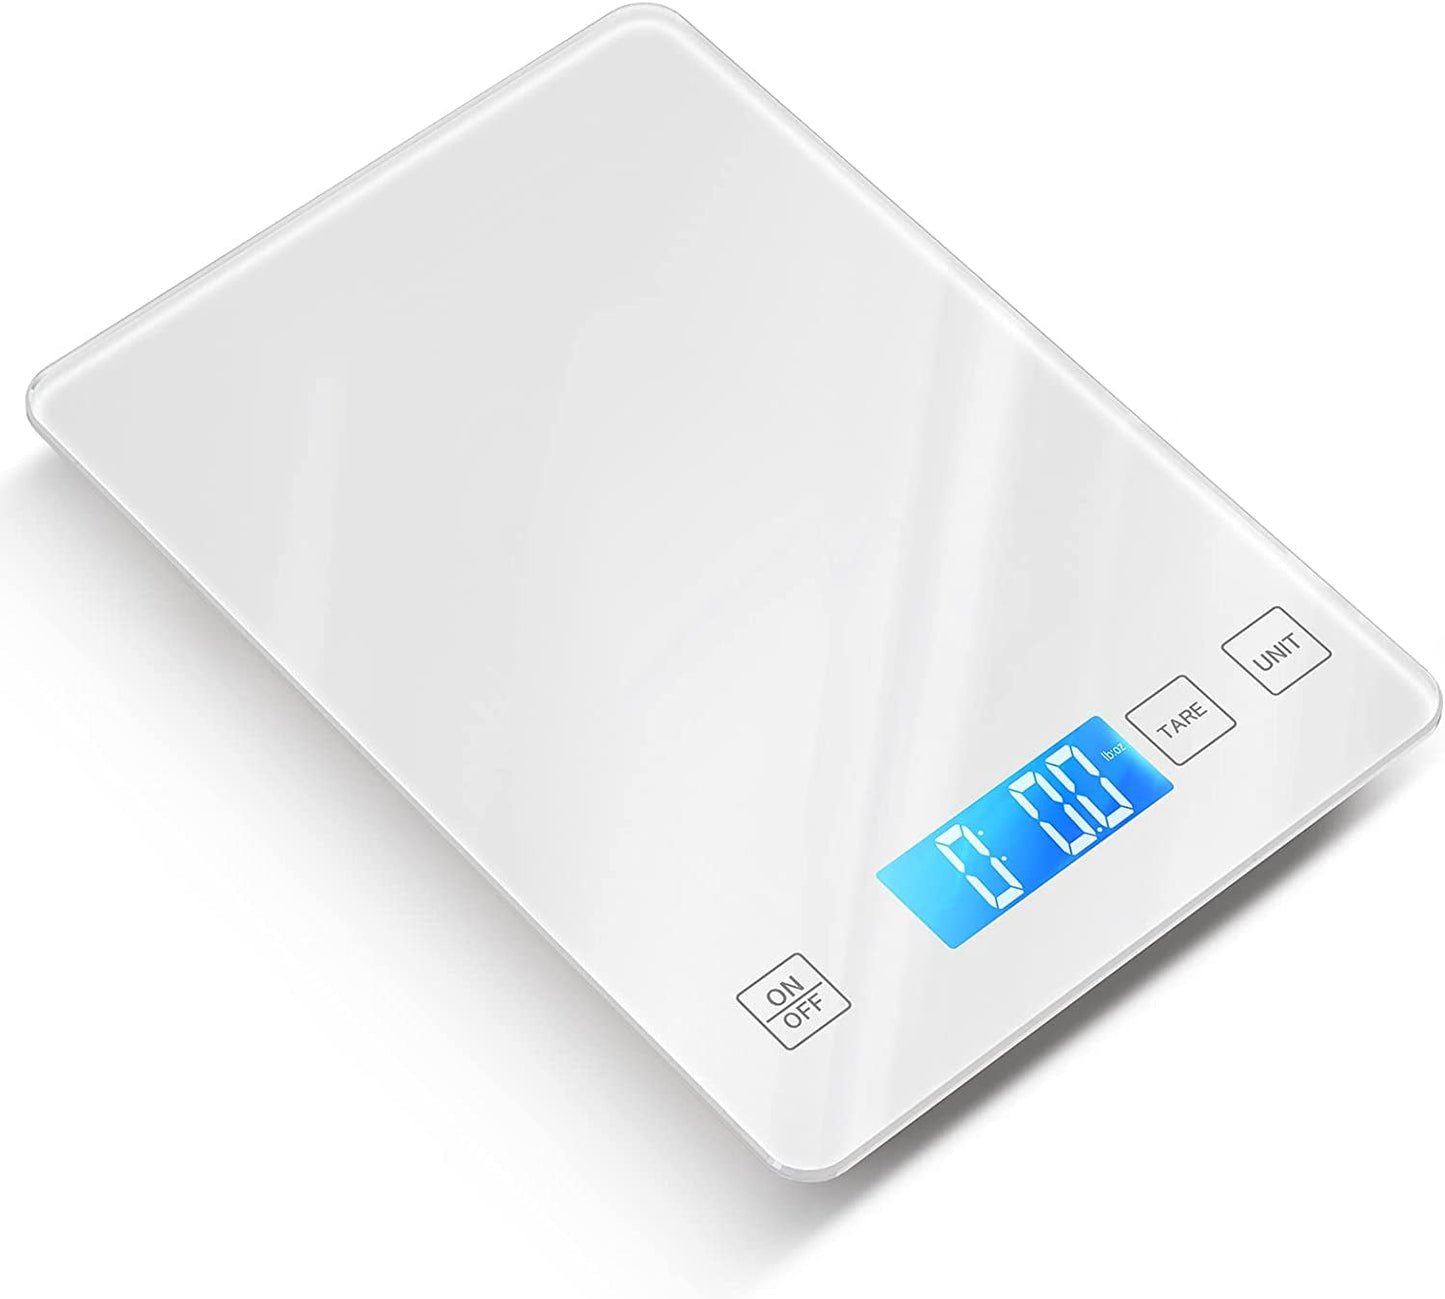 SUGIFT Digital Food Scale, 22lb Kitchen Scale Weight Grams and oz, 1g/0.1oz Precise Graduation for Baking, Cooking and Coffee-White